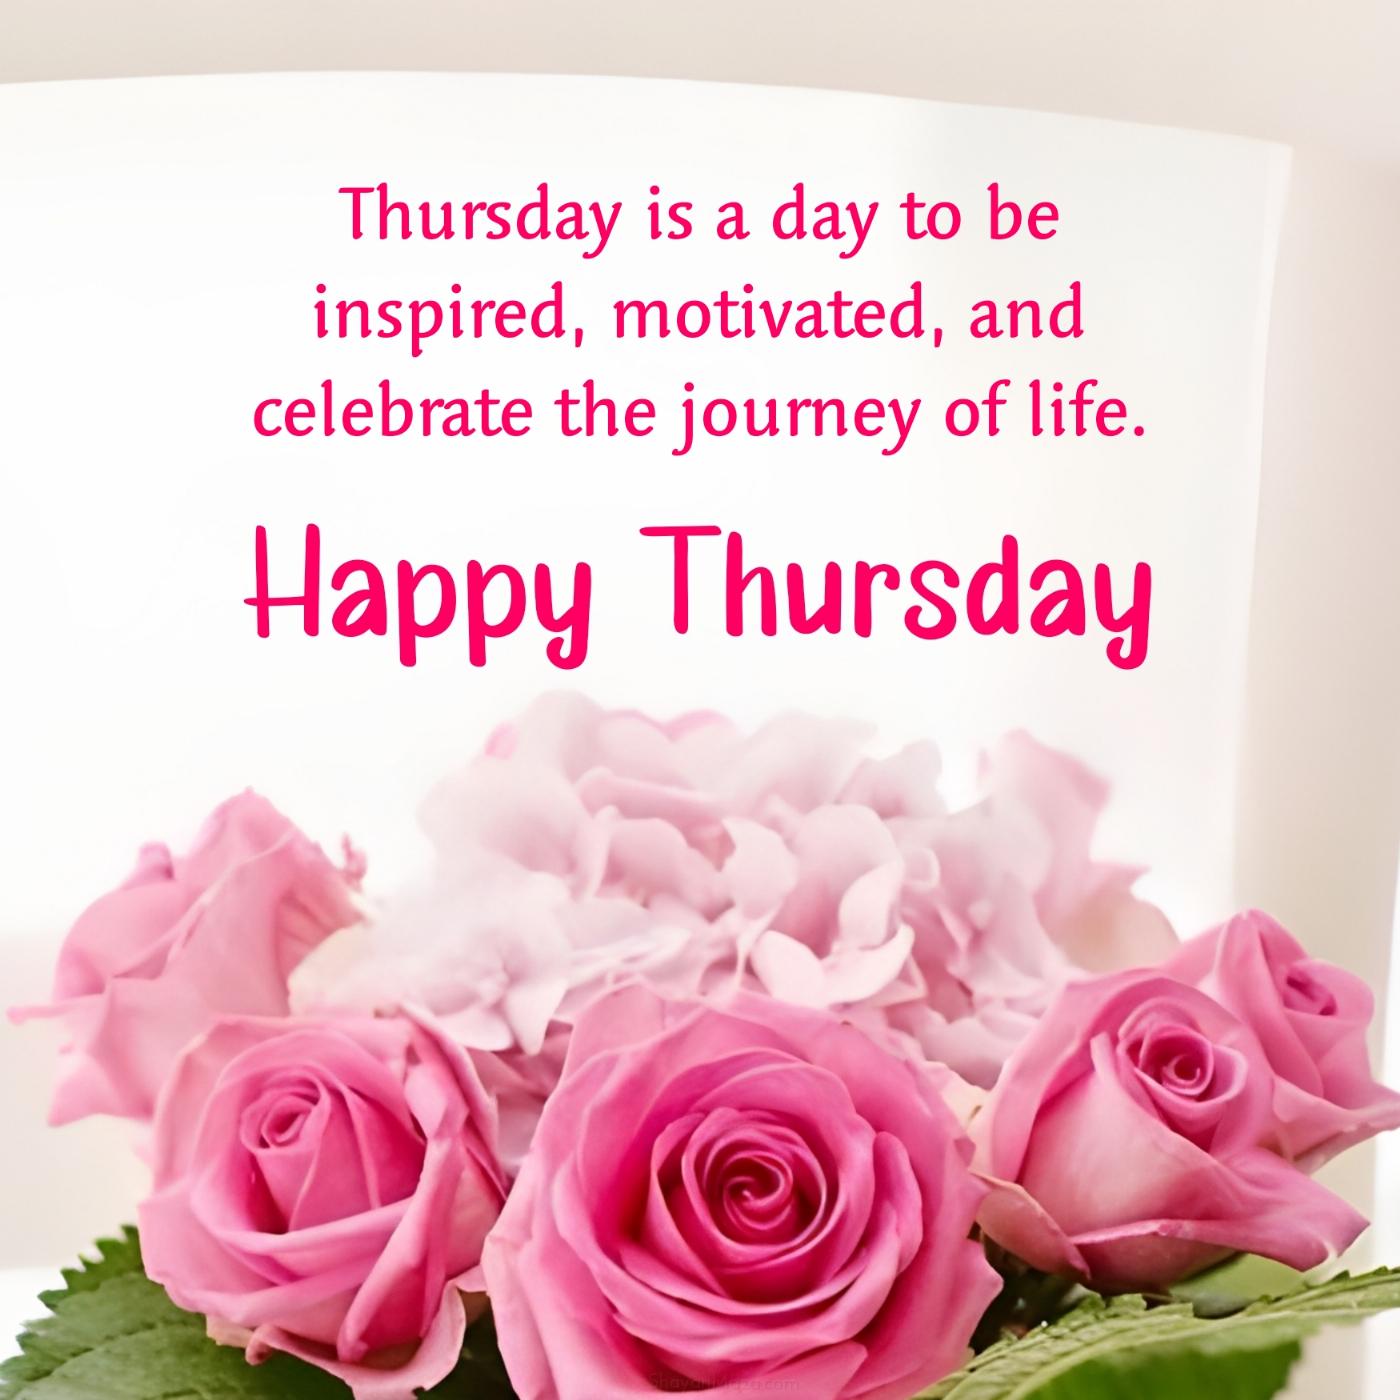 Thursday is a day to be inspired motivated and celebrate